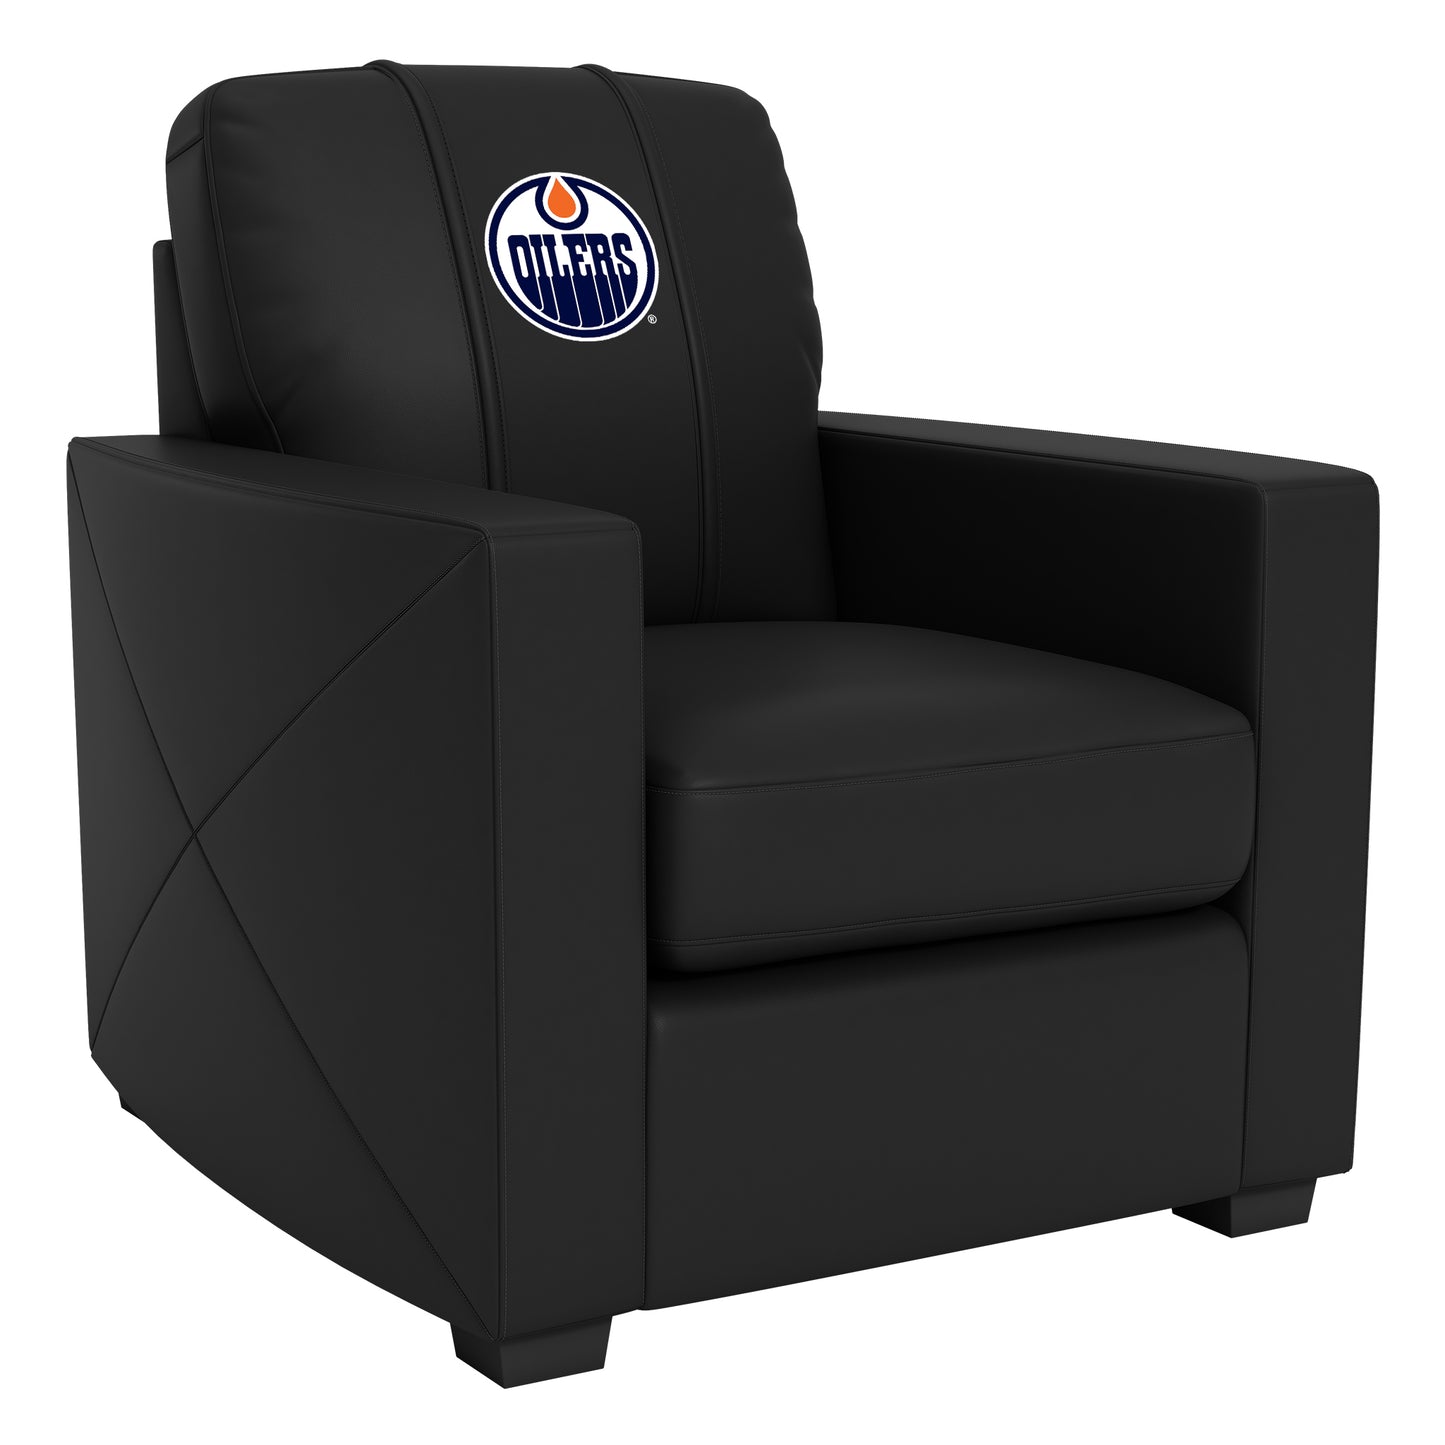 Silver Club Chair with Edmonton Oilers Logo